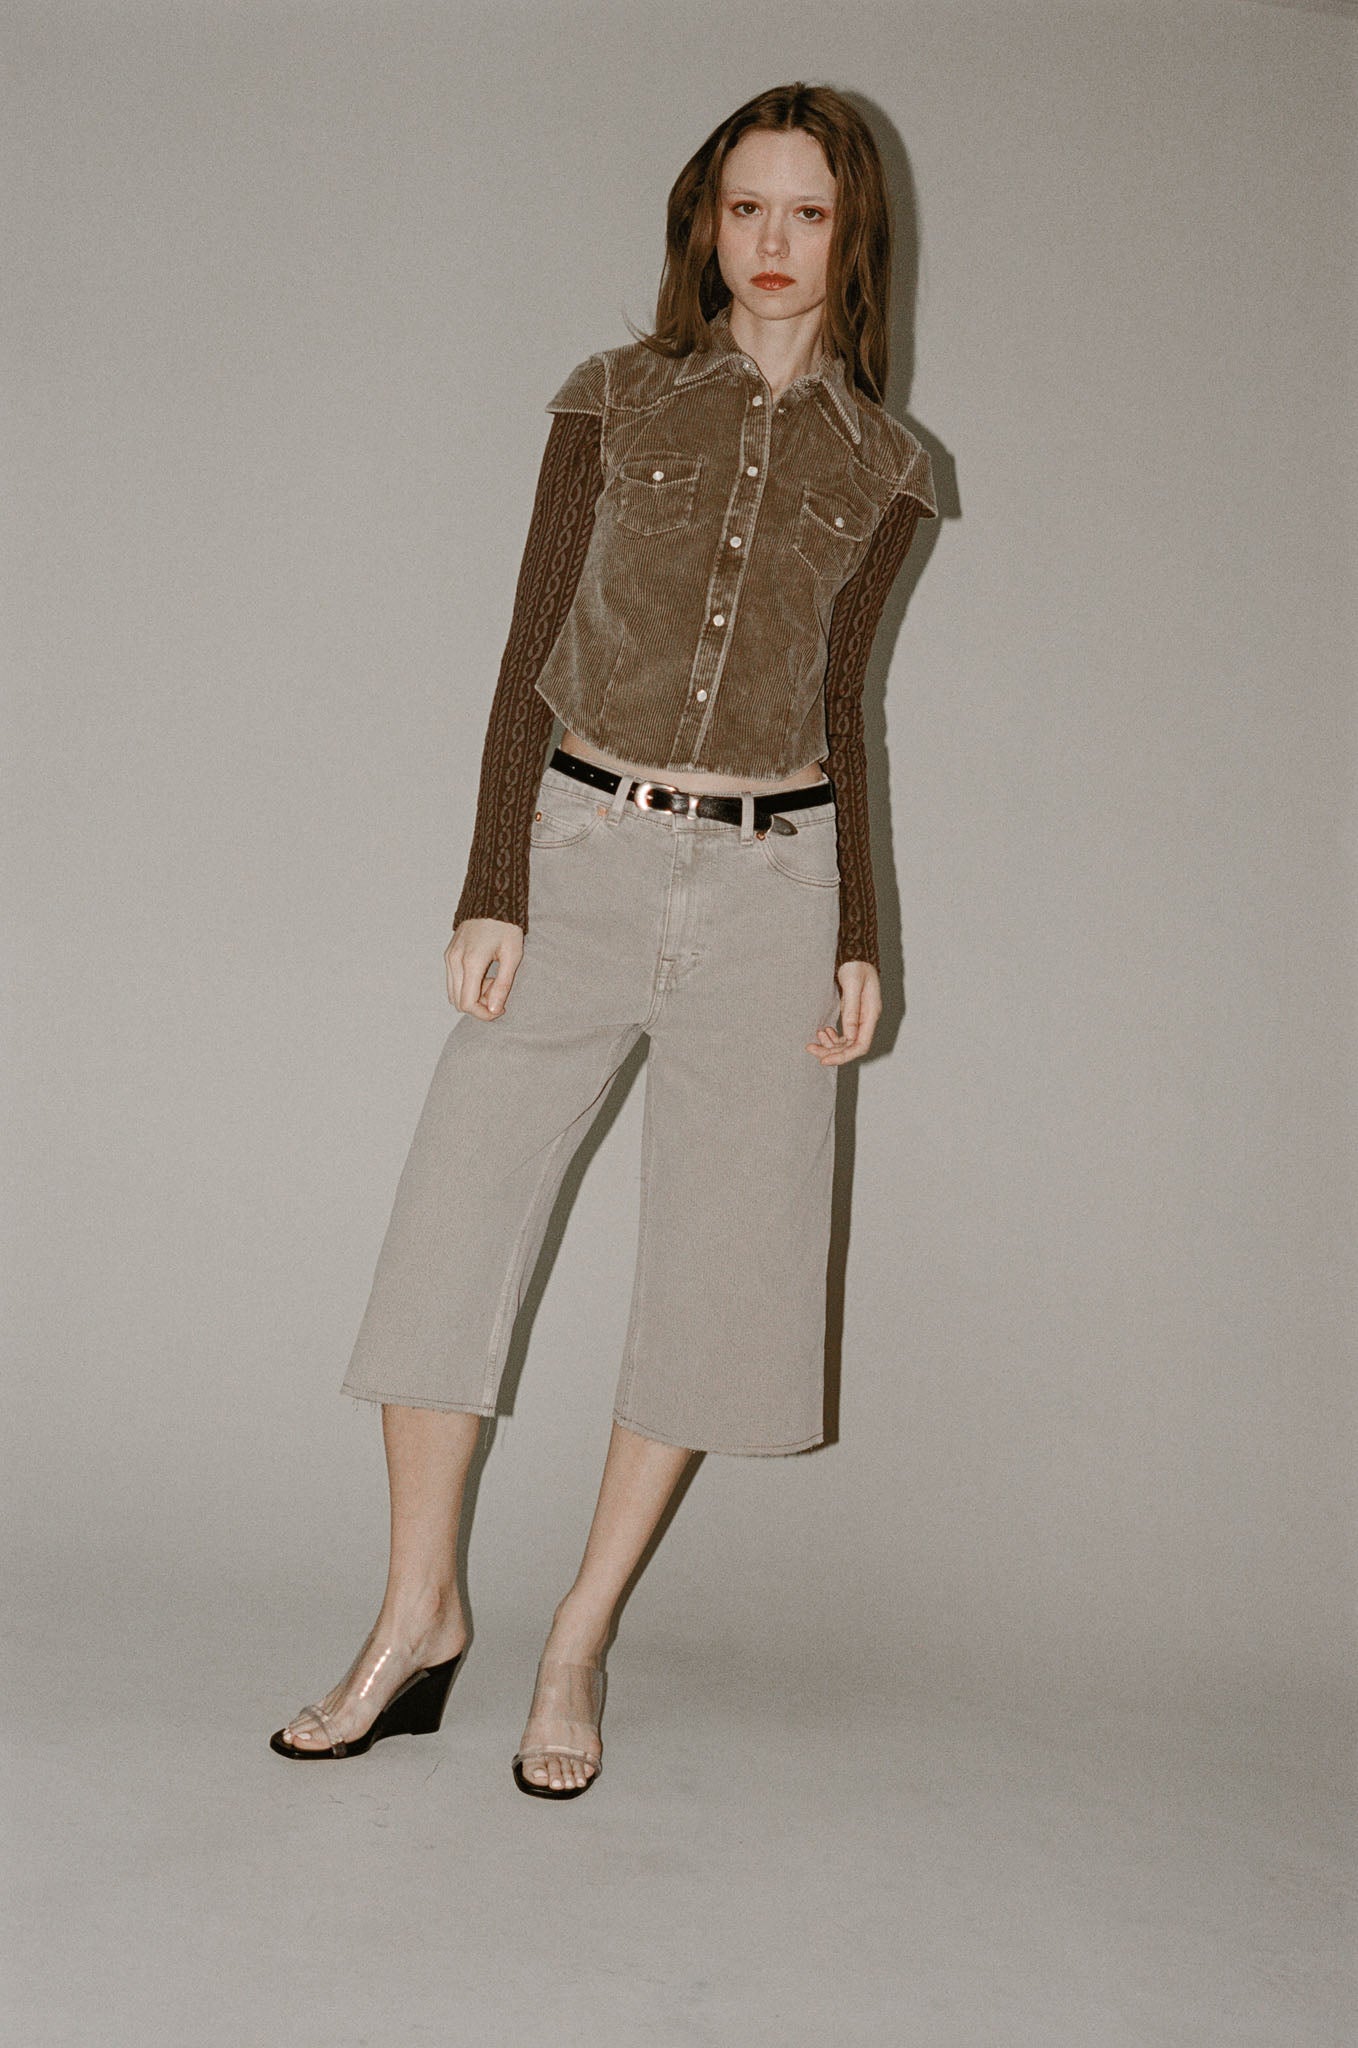 Our Legacy Daisy Short Sleeve Shirt in Brown